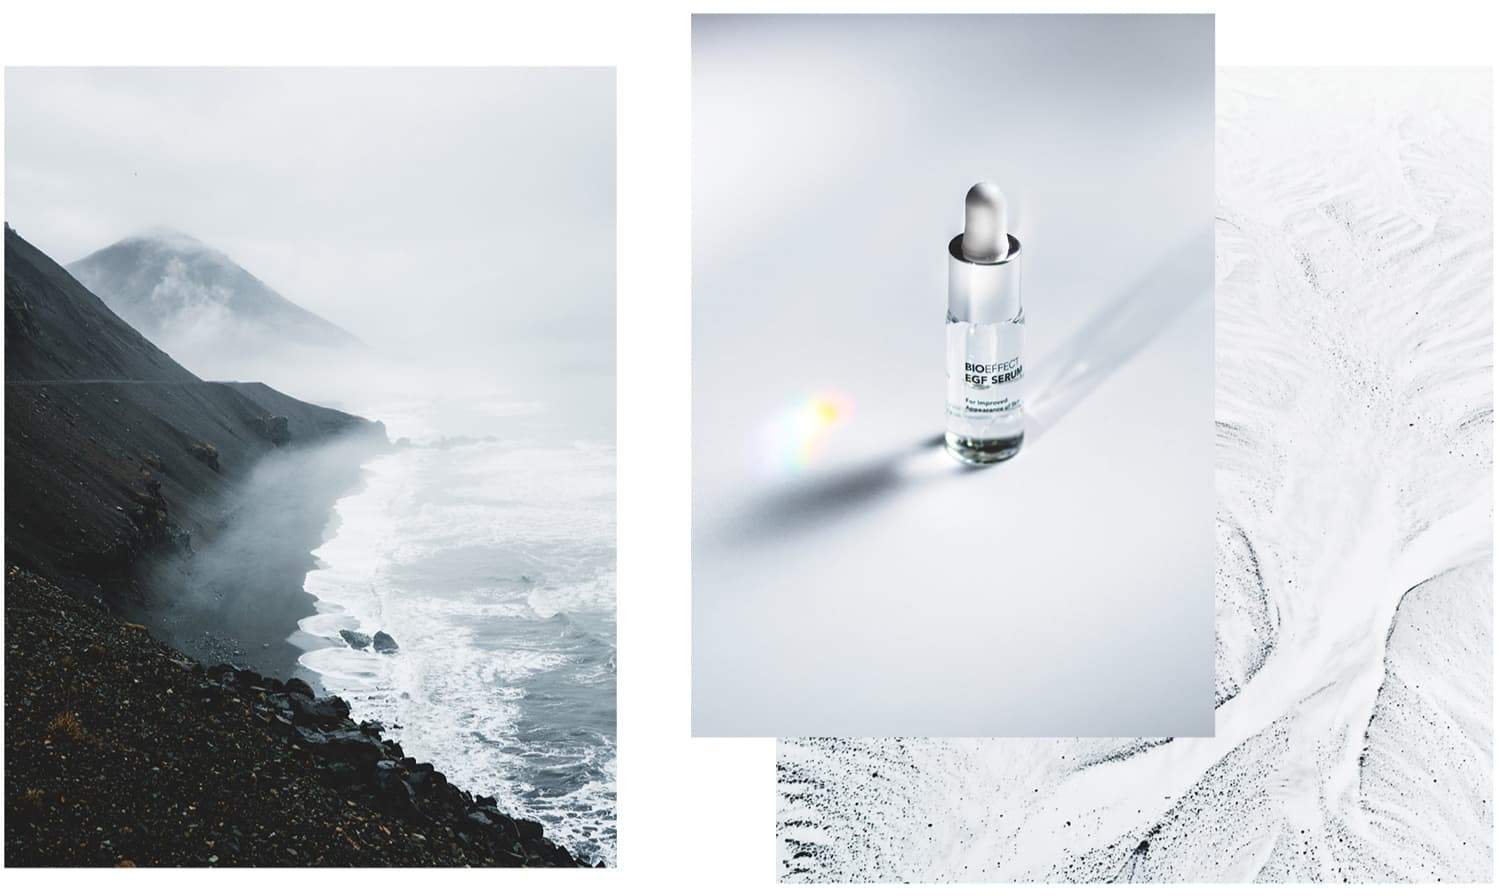 3 images arranged artfully. The image on the left is a birds-eye-view of a rocky coastline in foggy, overcast weather with mountains. A smaller image to the right features a bottle of BIOEFFECT pure skin care EGF Serum sitting on a white surface with natural light shining through. Behind this image is a minimal, all-white scene of natural, snowy landscape from high above.